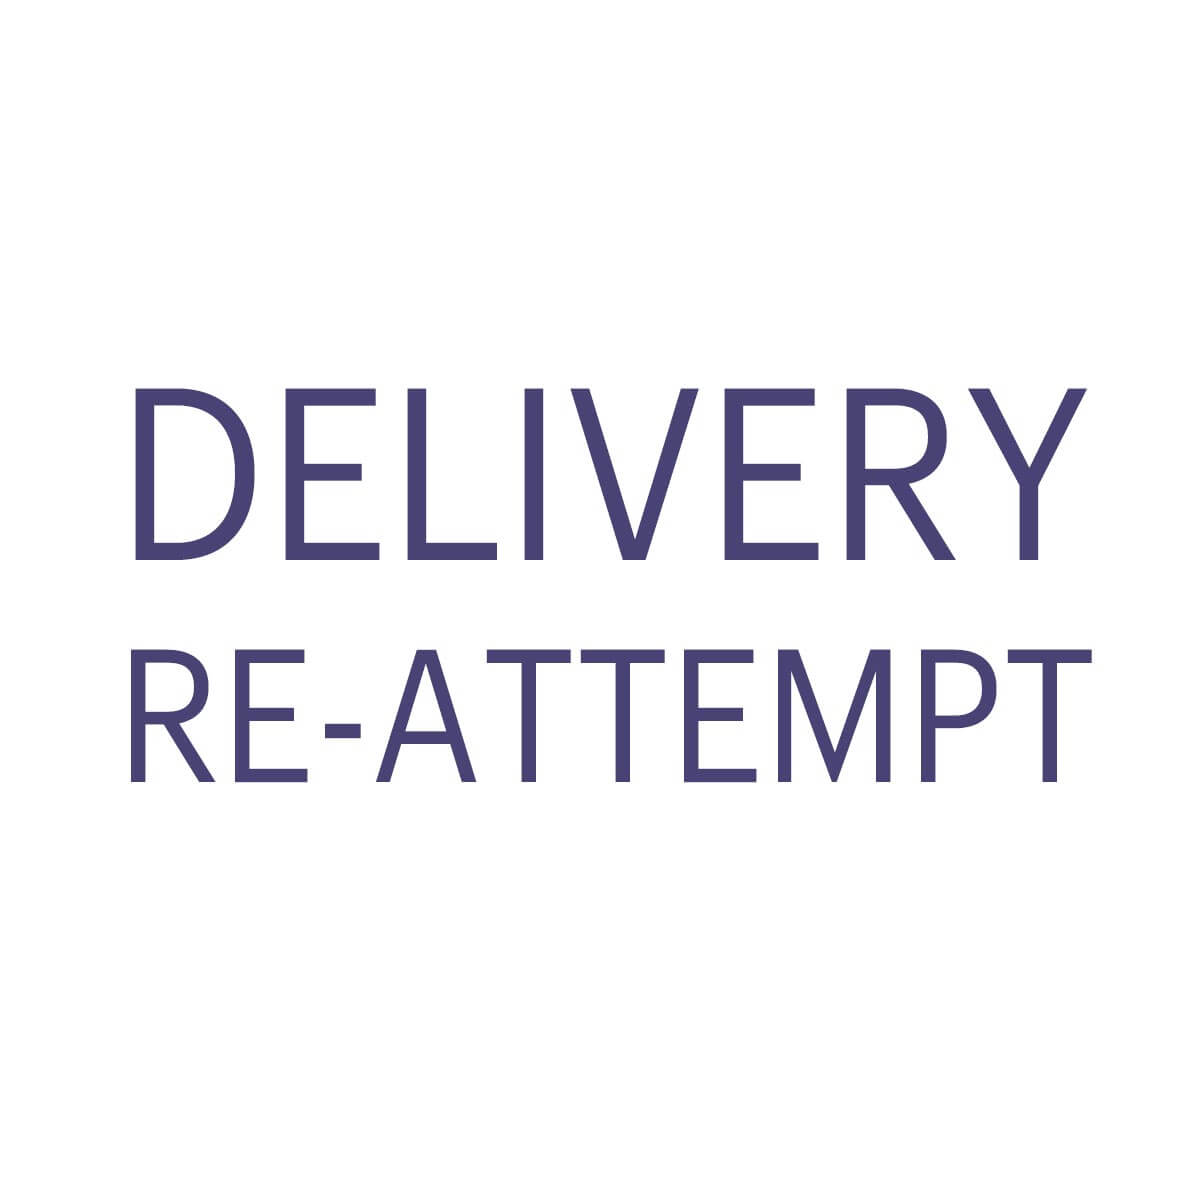 Delivery Reattempt